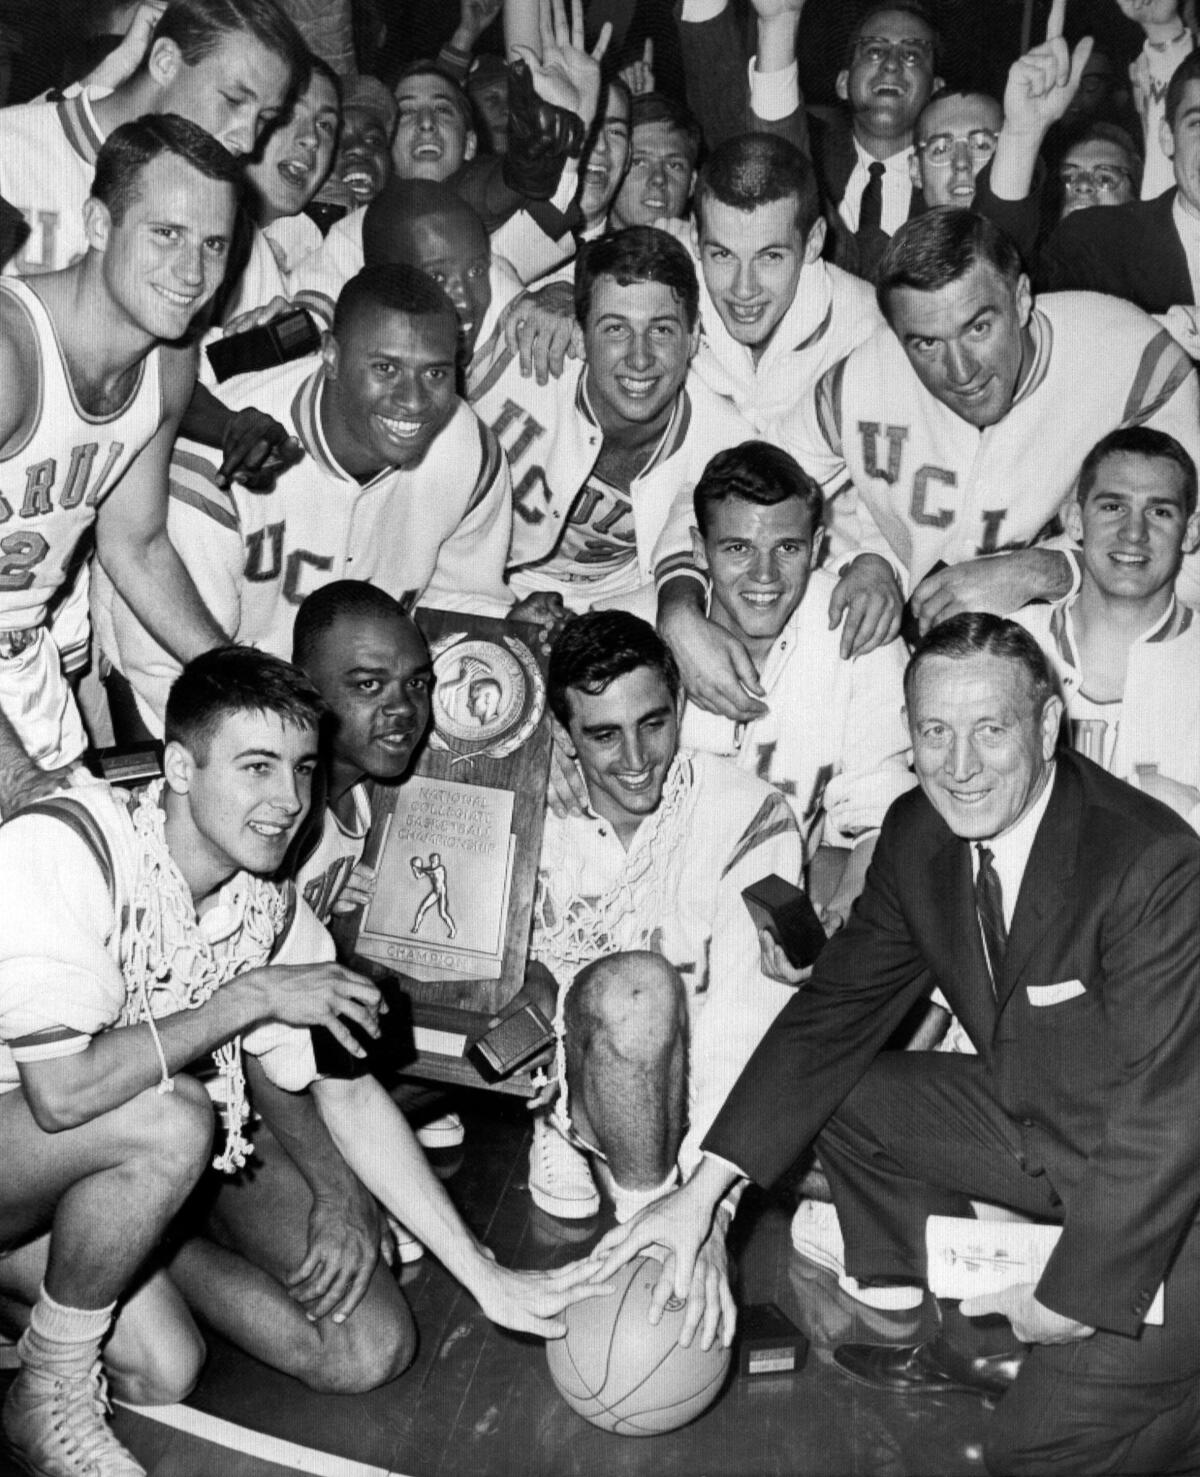 John Wooden and his UCLA team celebrate a win in 1964 with a group photo